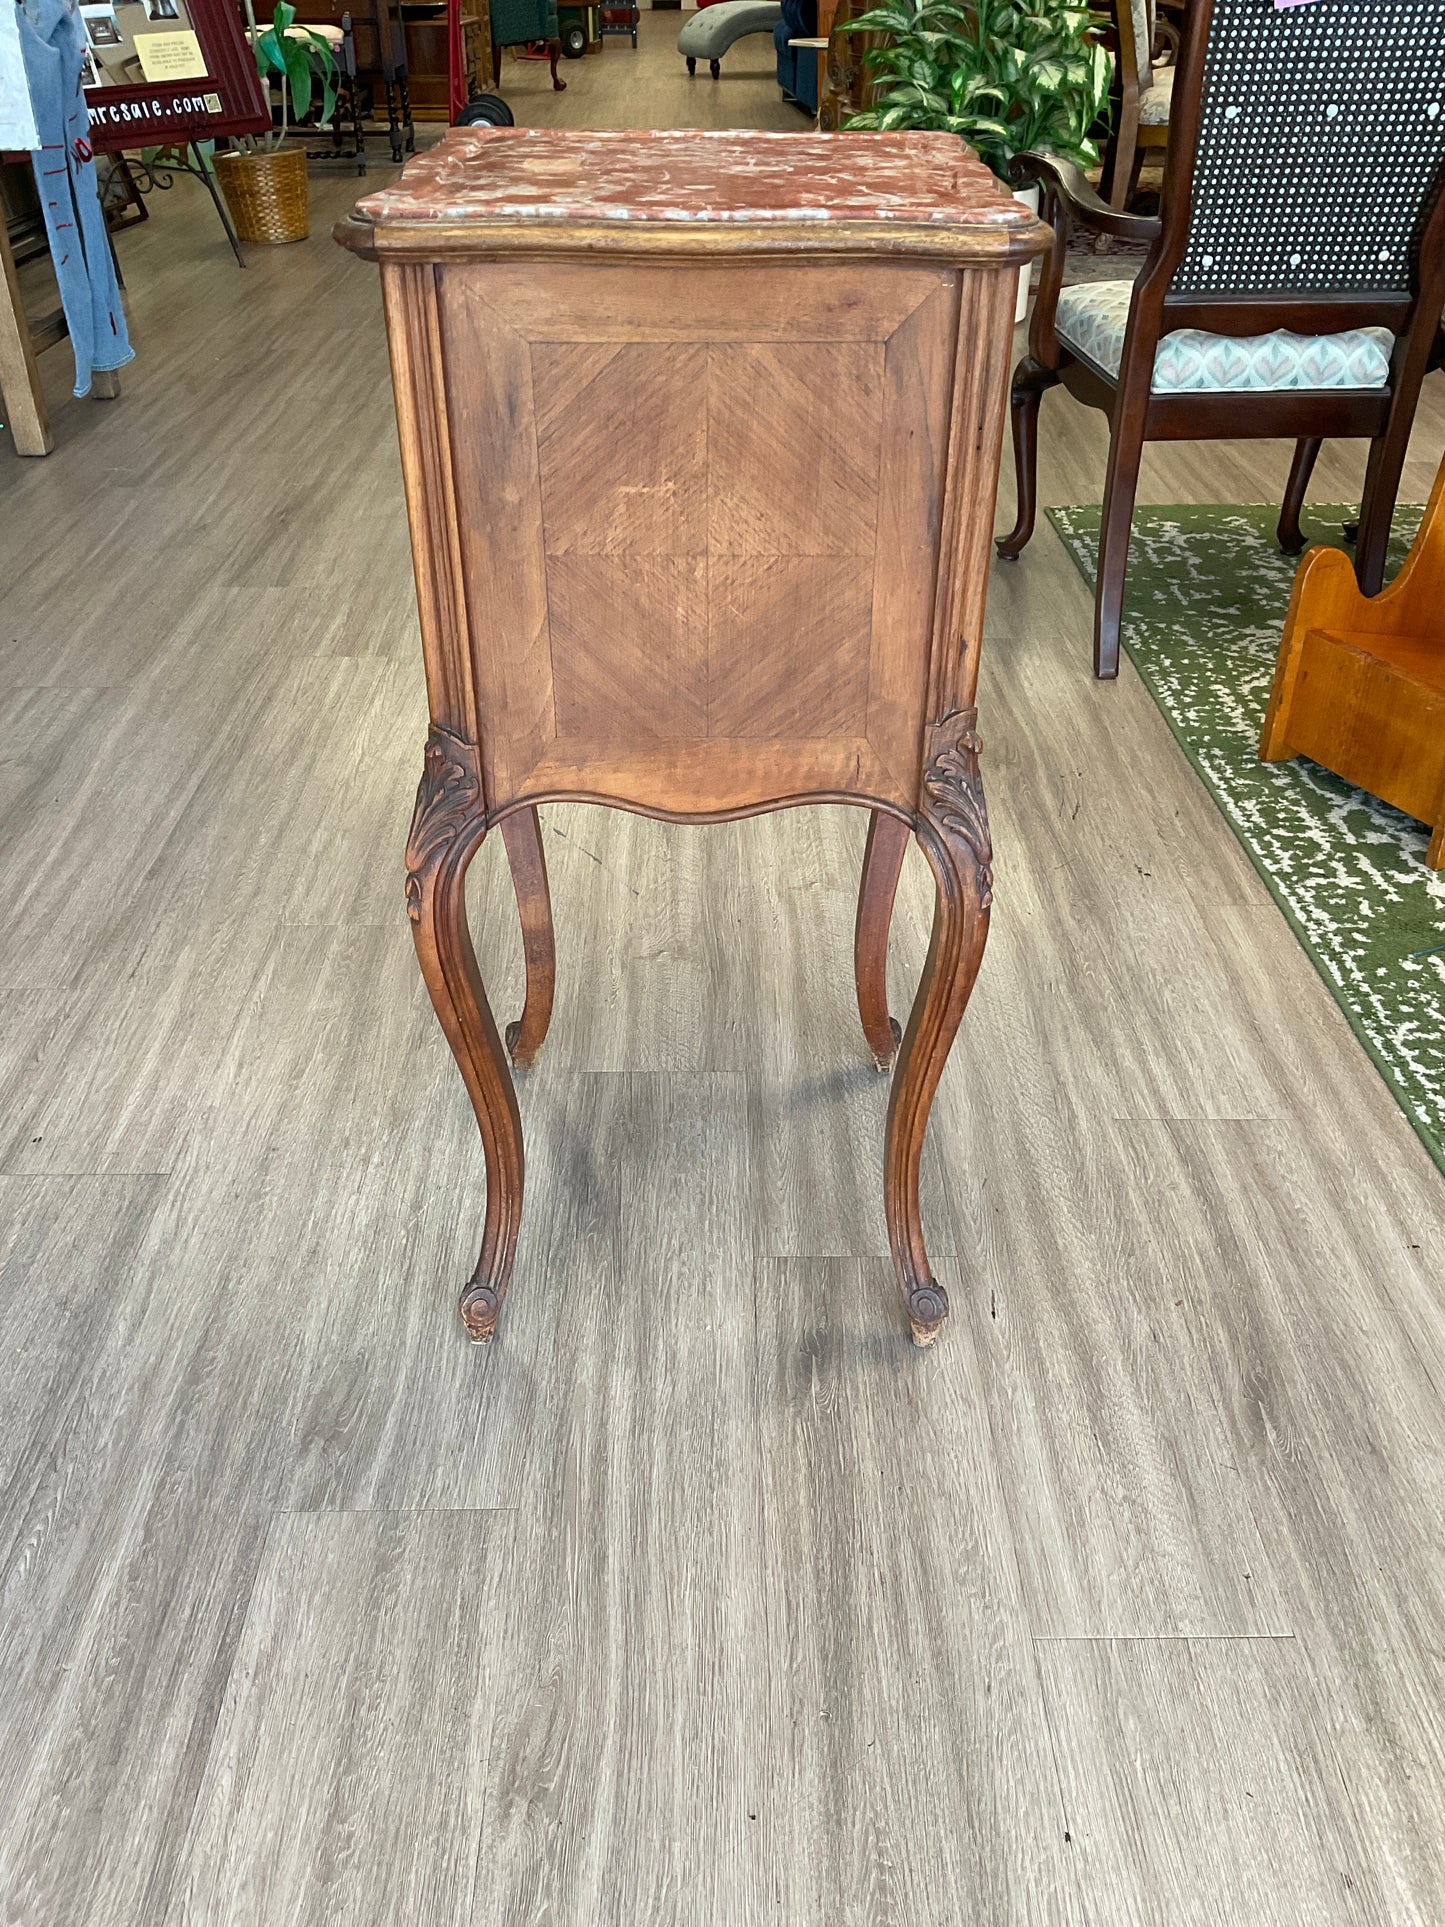 Antique Marble Top Side Table, SOLD AS IS